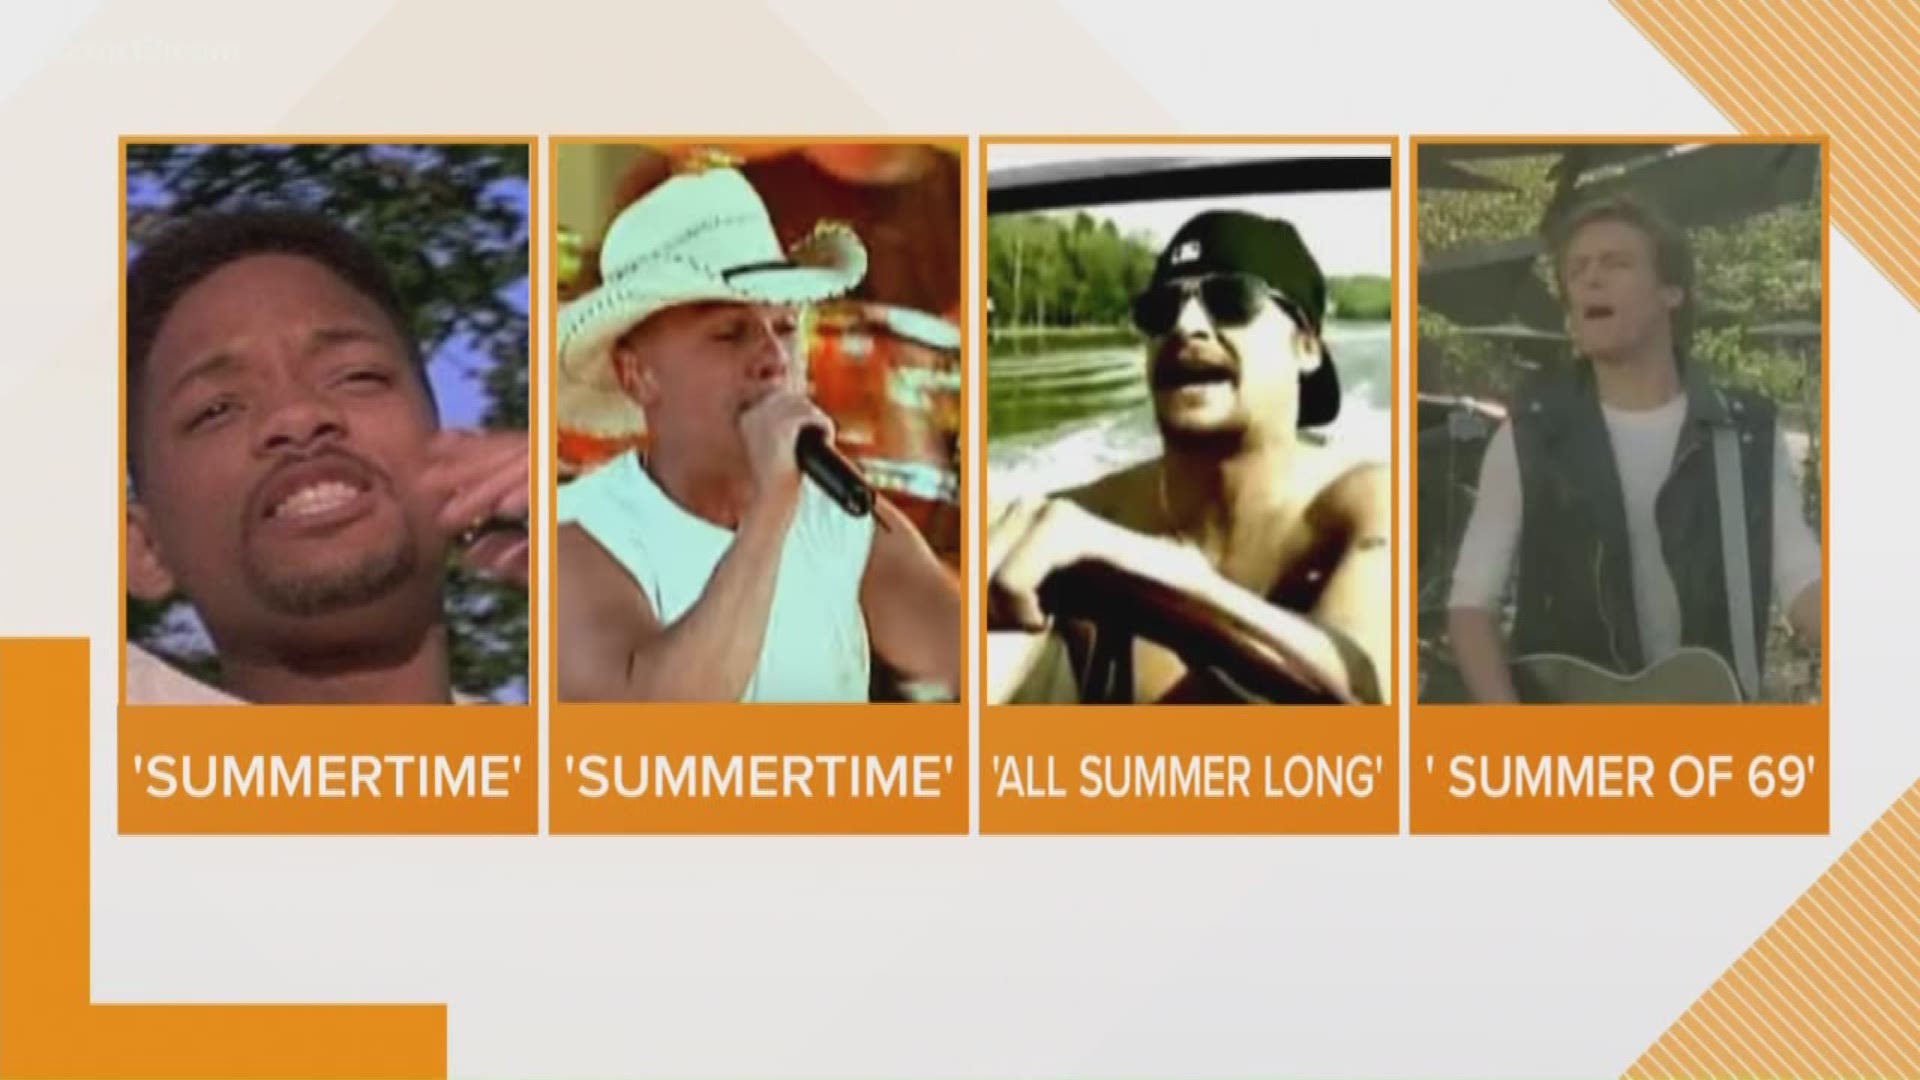 Ultimate 'summer' song for the first day of summer